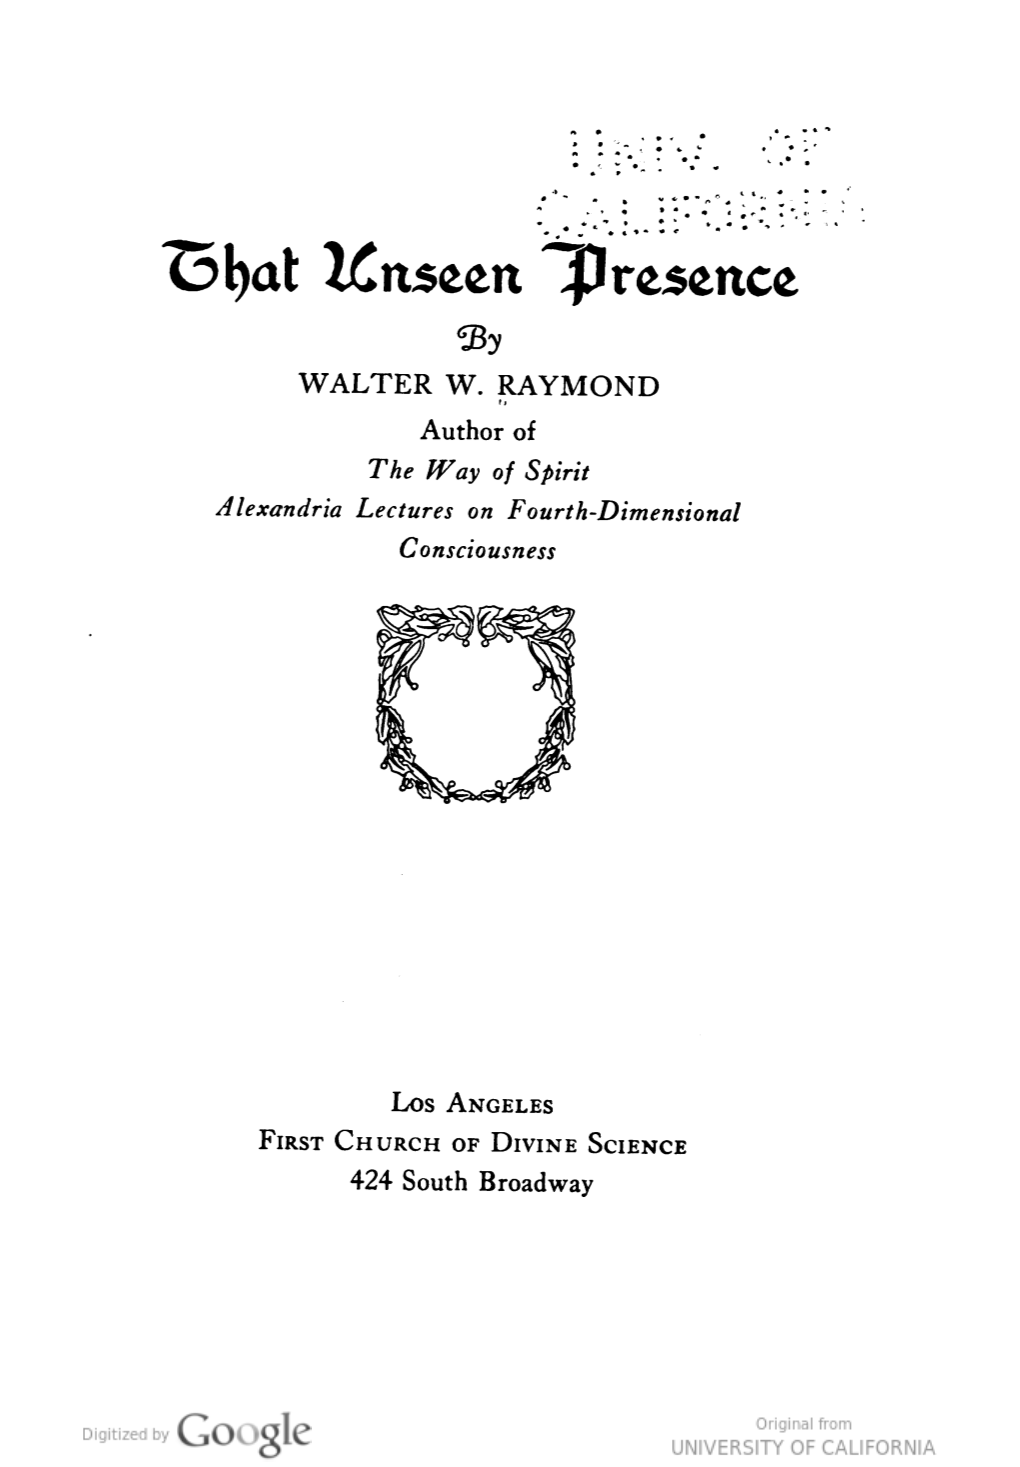 That Unseen Presence, by Walter W. Raymond